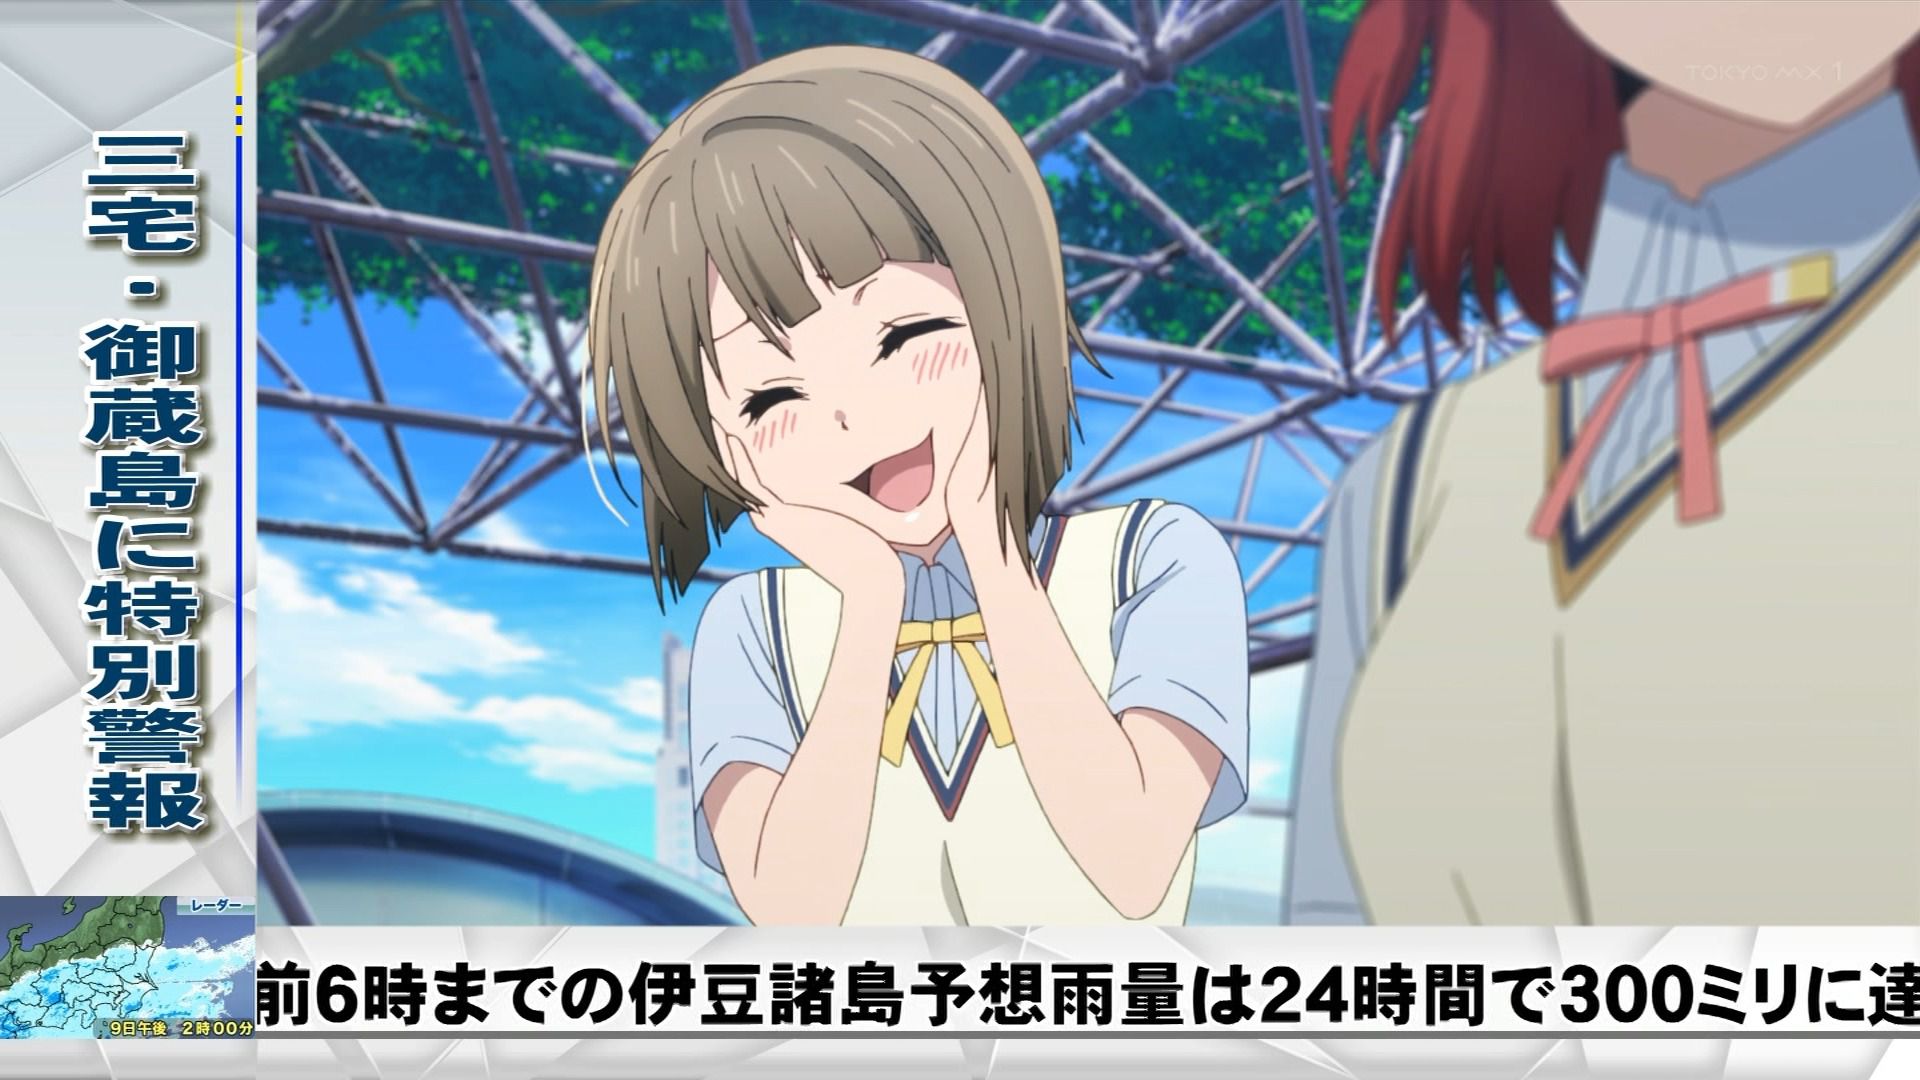 Moe Amusement Park: Love Live! Rainbowgasaki Gakuen School Idol Association" 2 episodes impression. The new character is also buhi power high! Everyone is too cute after all on top! ! 7